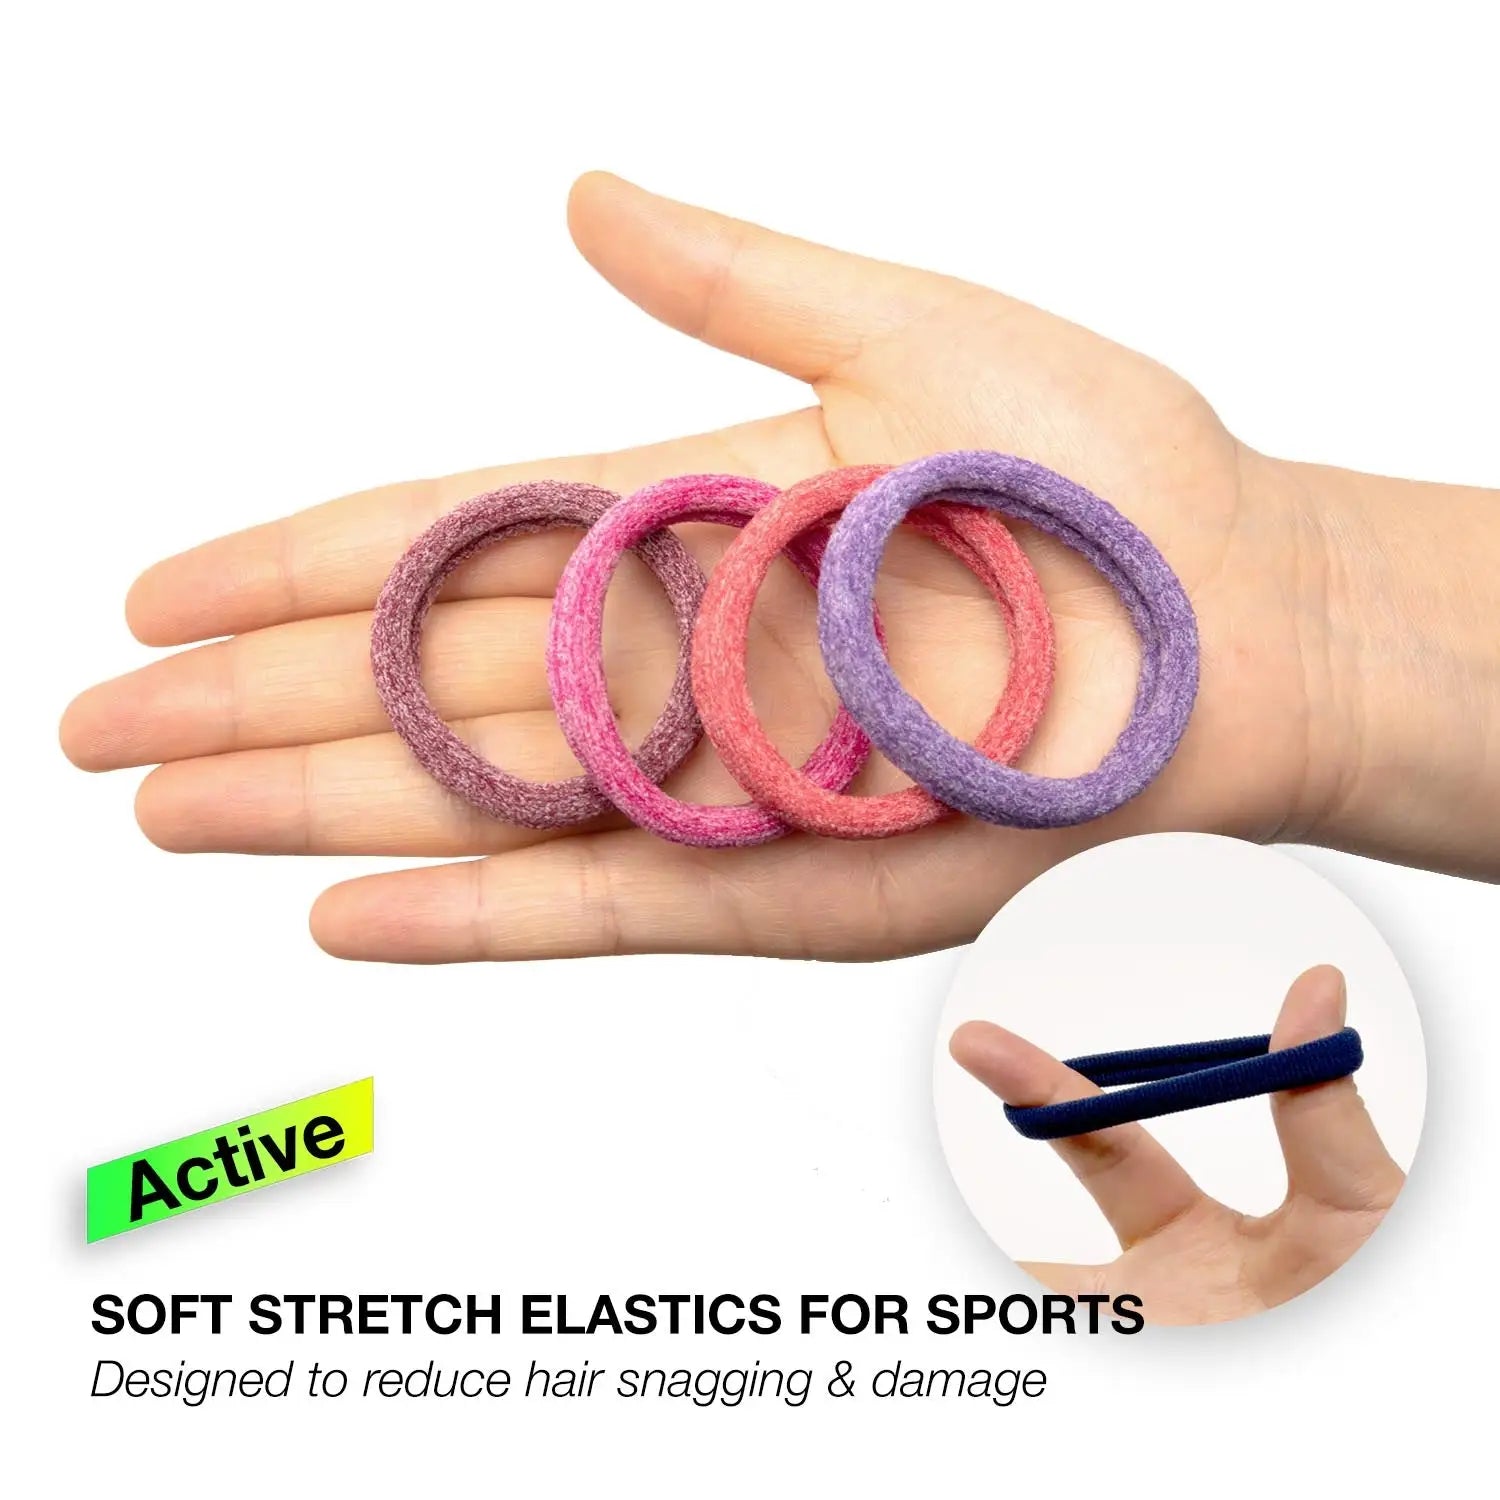 Three jersey marl sports hair elastics in different colors